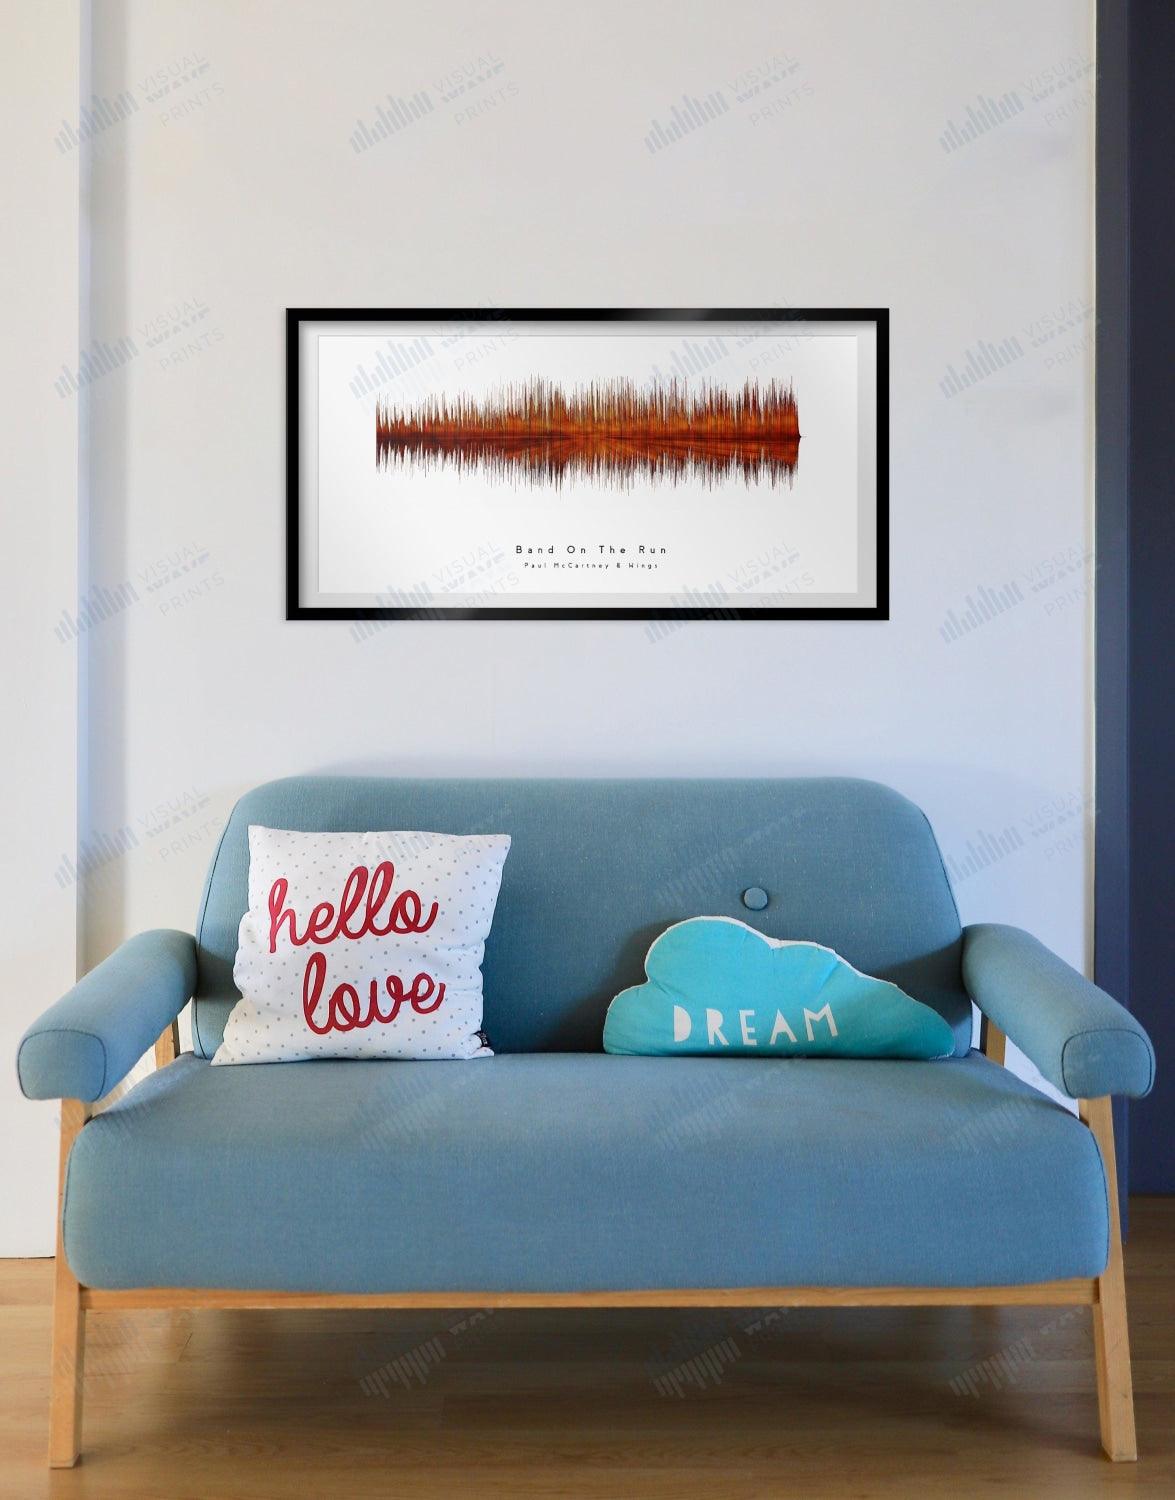 Band On The Run by Paul McCartney & Wings - Visual Wave Prints